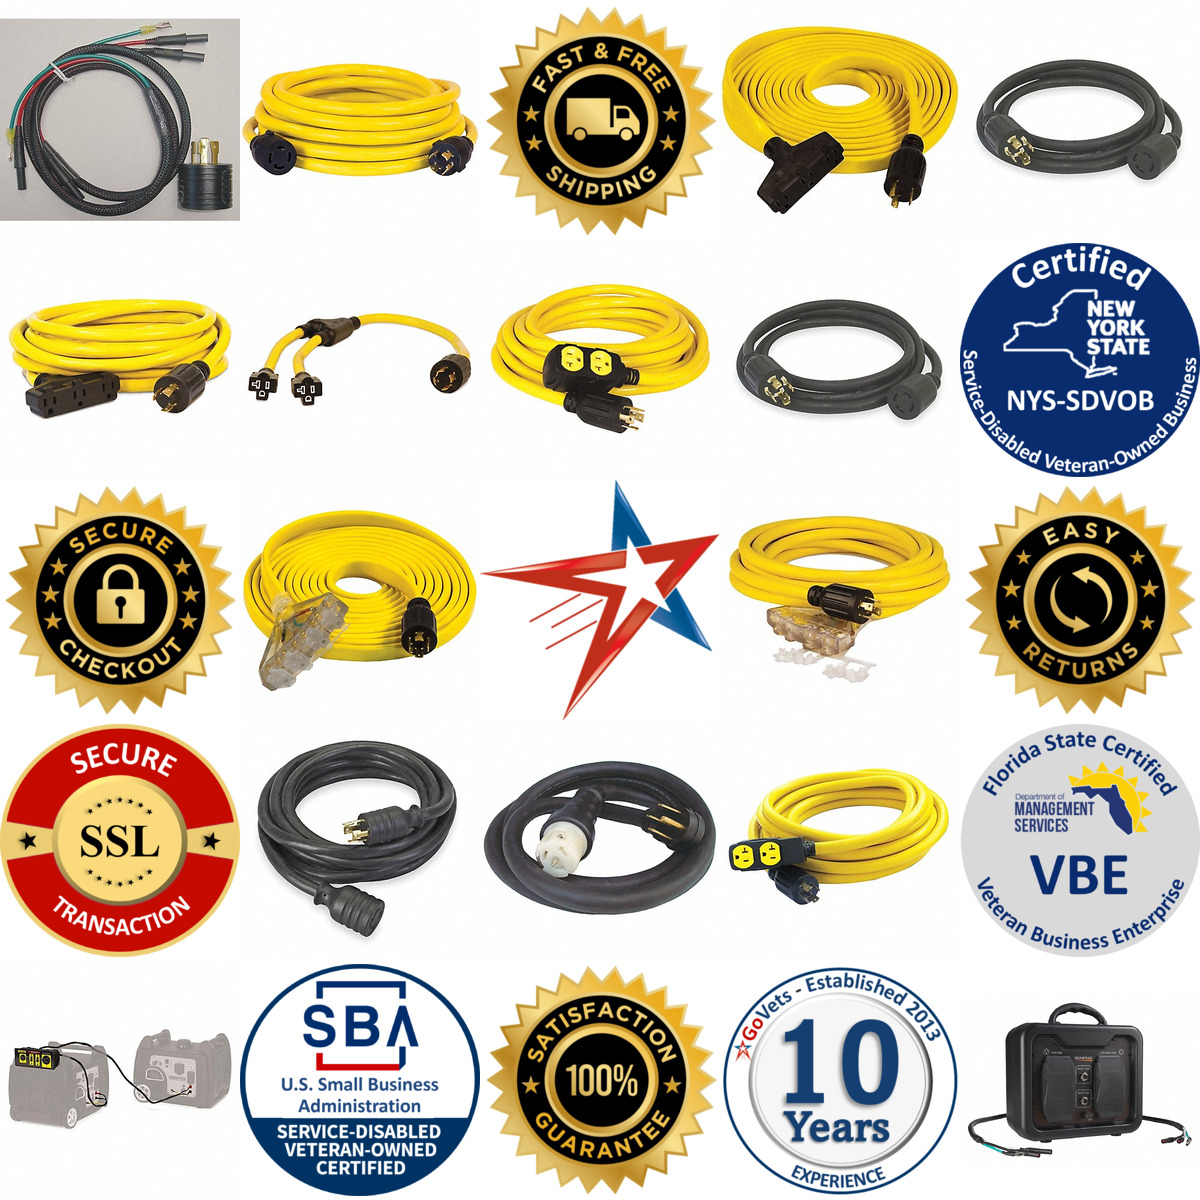 A selection of Portable Generator Power Cords products on GoVets